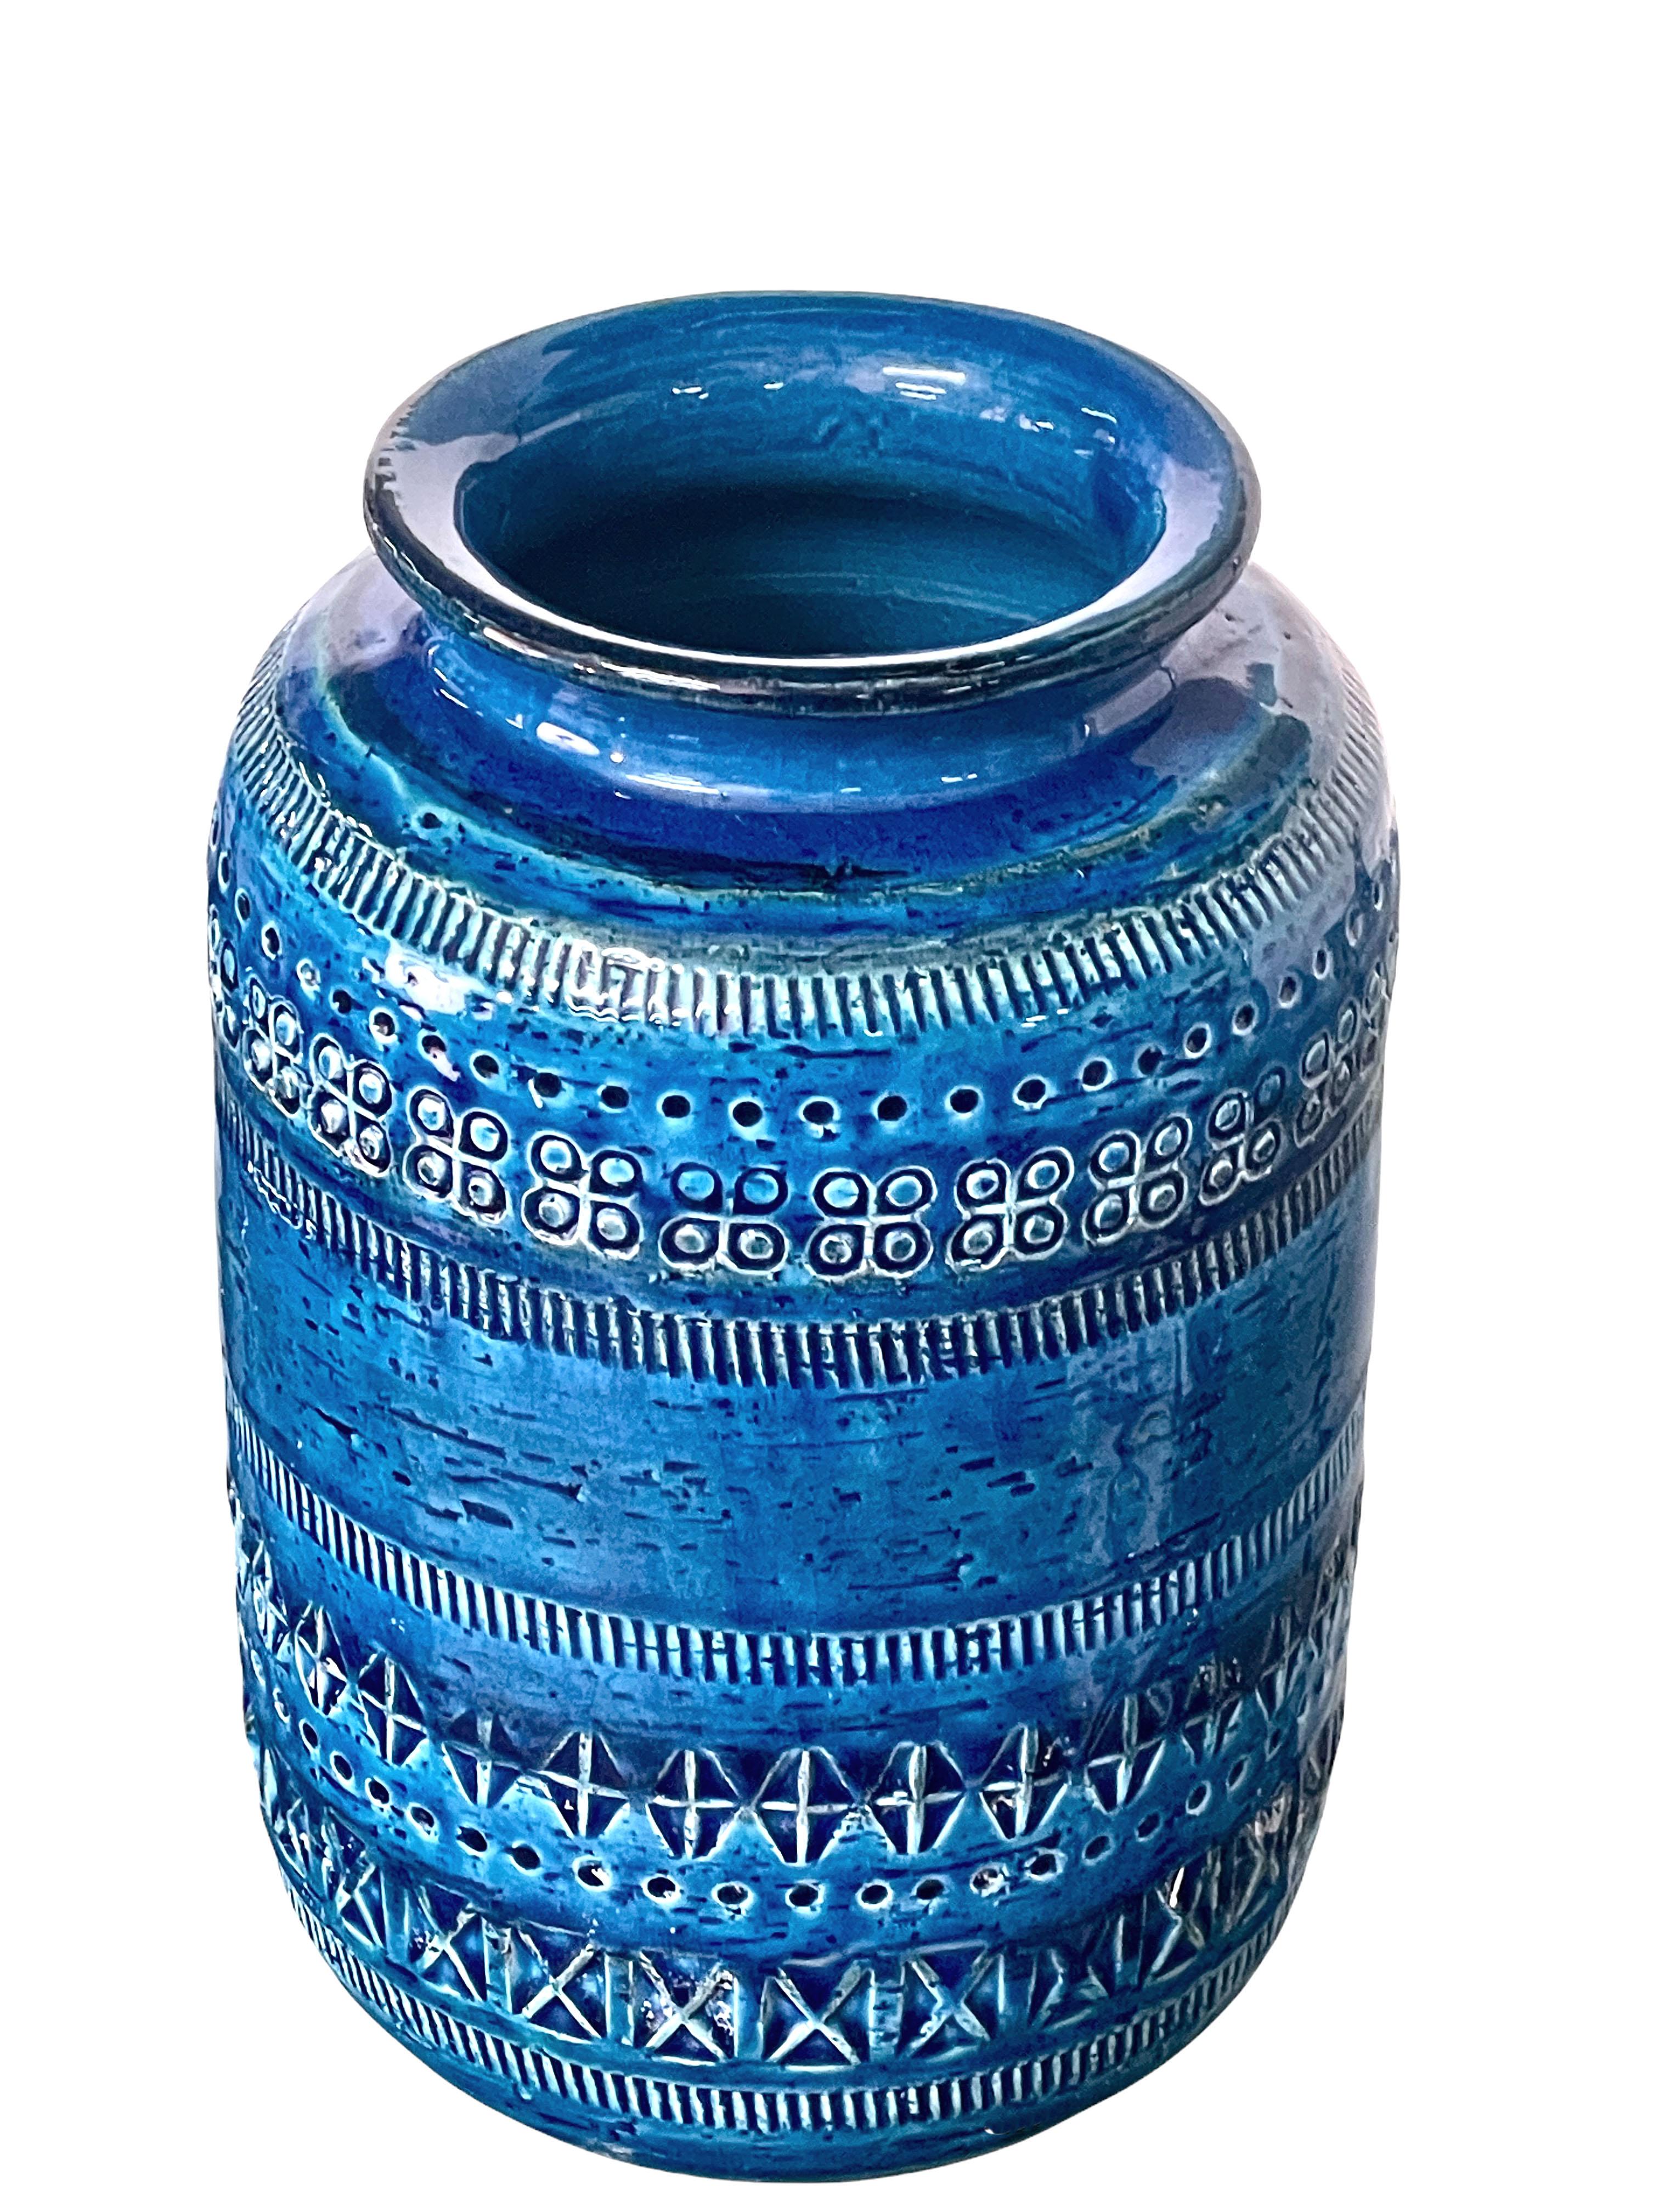 Amazing mid-century blue glazed terracotta ceramic blue vase. This fantastic item was designed by Flavia Montelupo and Aldo Londi for Bitossi in Italy, Rimini, during the late 1950s or early 1960s.

This magnificent piece was handcrafted in Italy